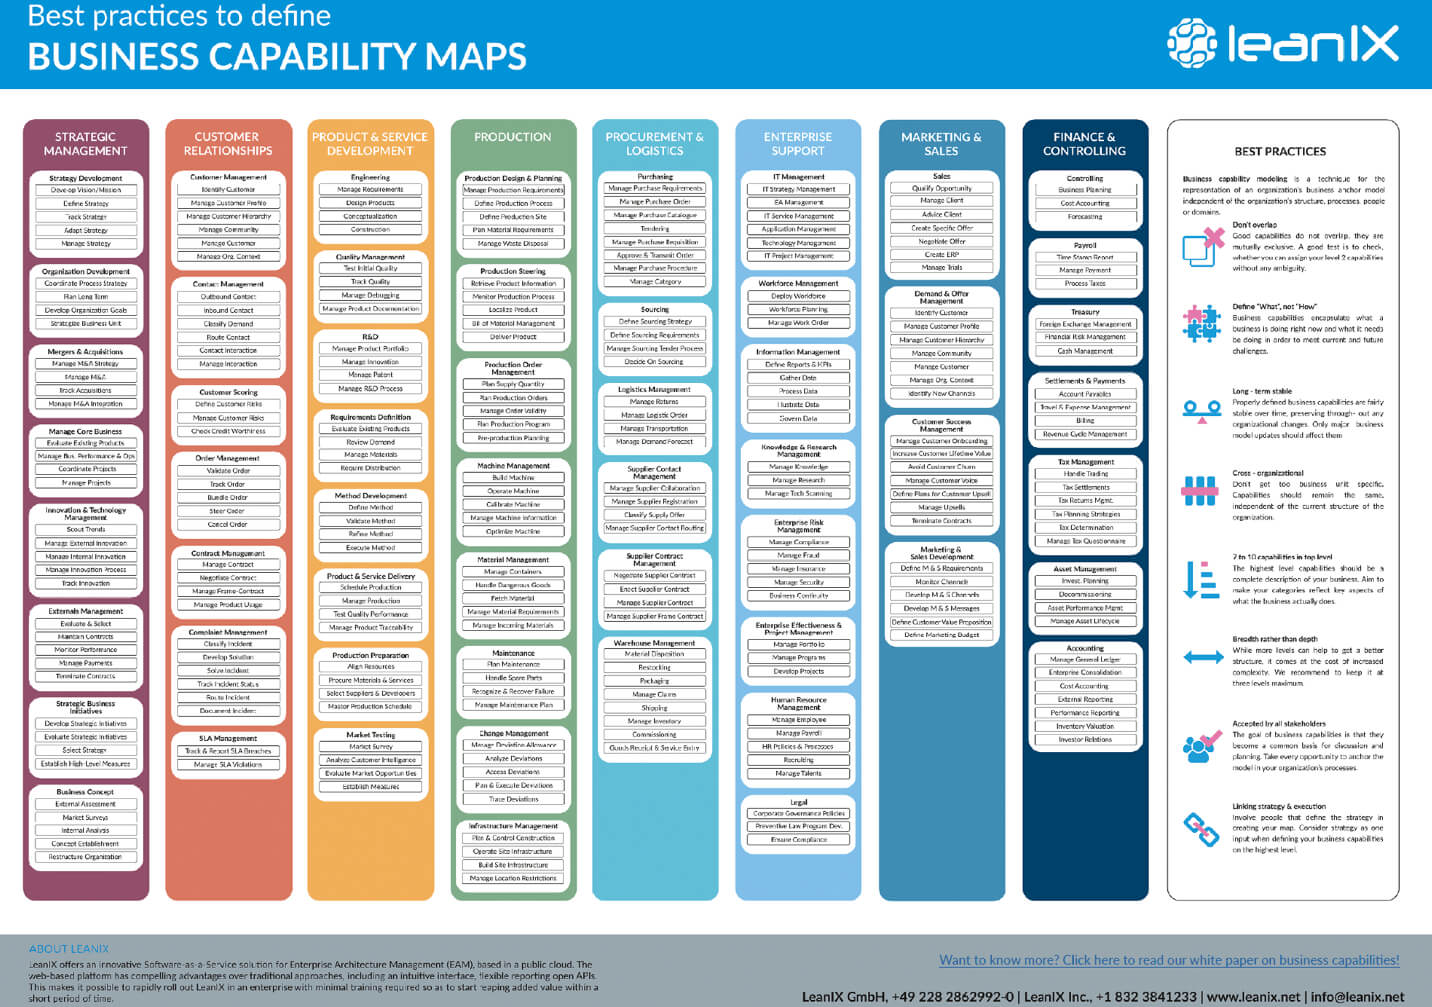 Creating Business Value With Business Capabilities | Digital Regarding Business Capability Map Template